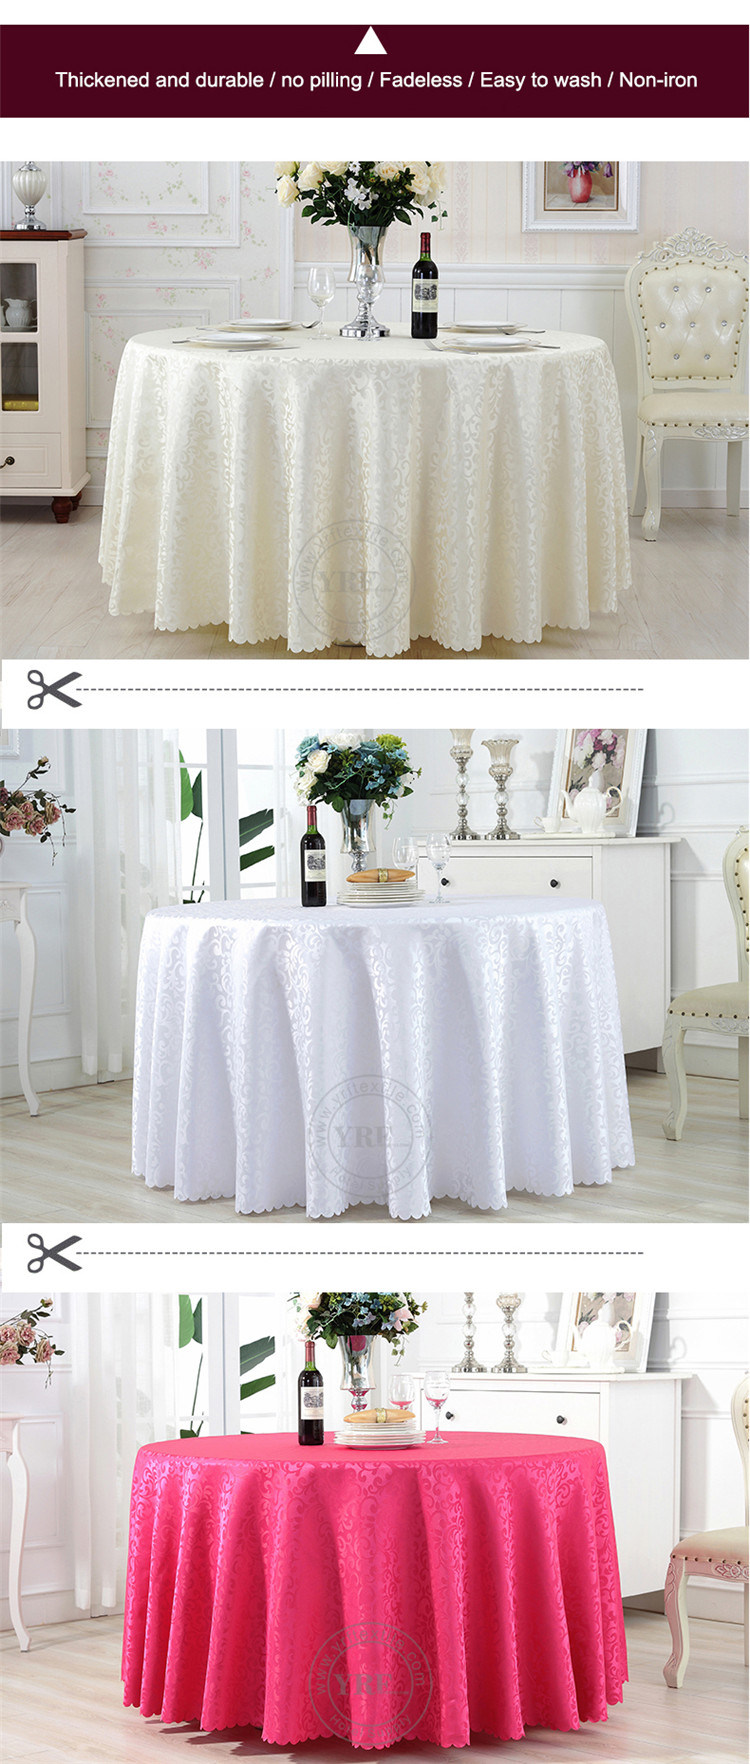 Wedding White Rosette Round Embroidery Tablecloth